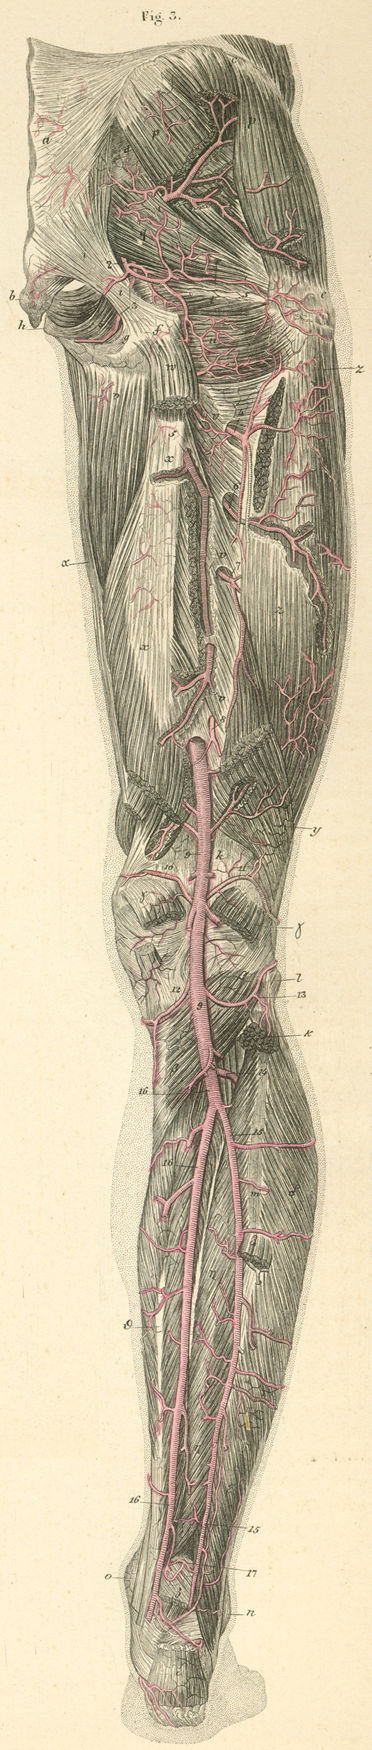 Arteries of the posterior surface of the pelvis and (right) thigh, leg and foot